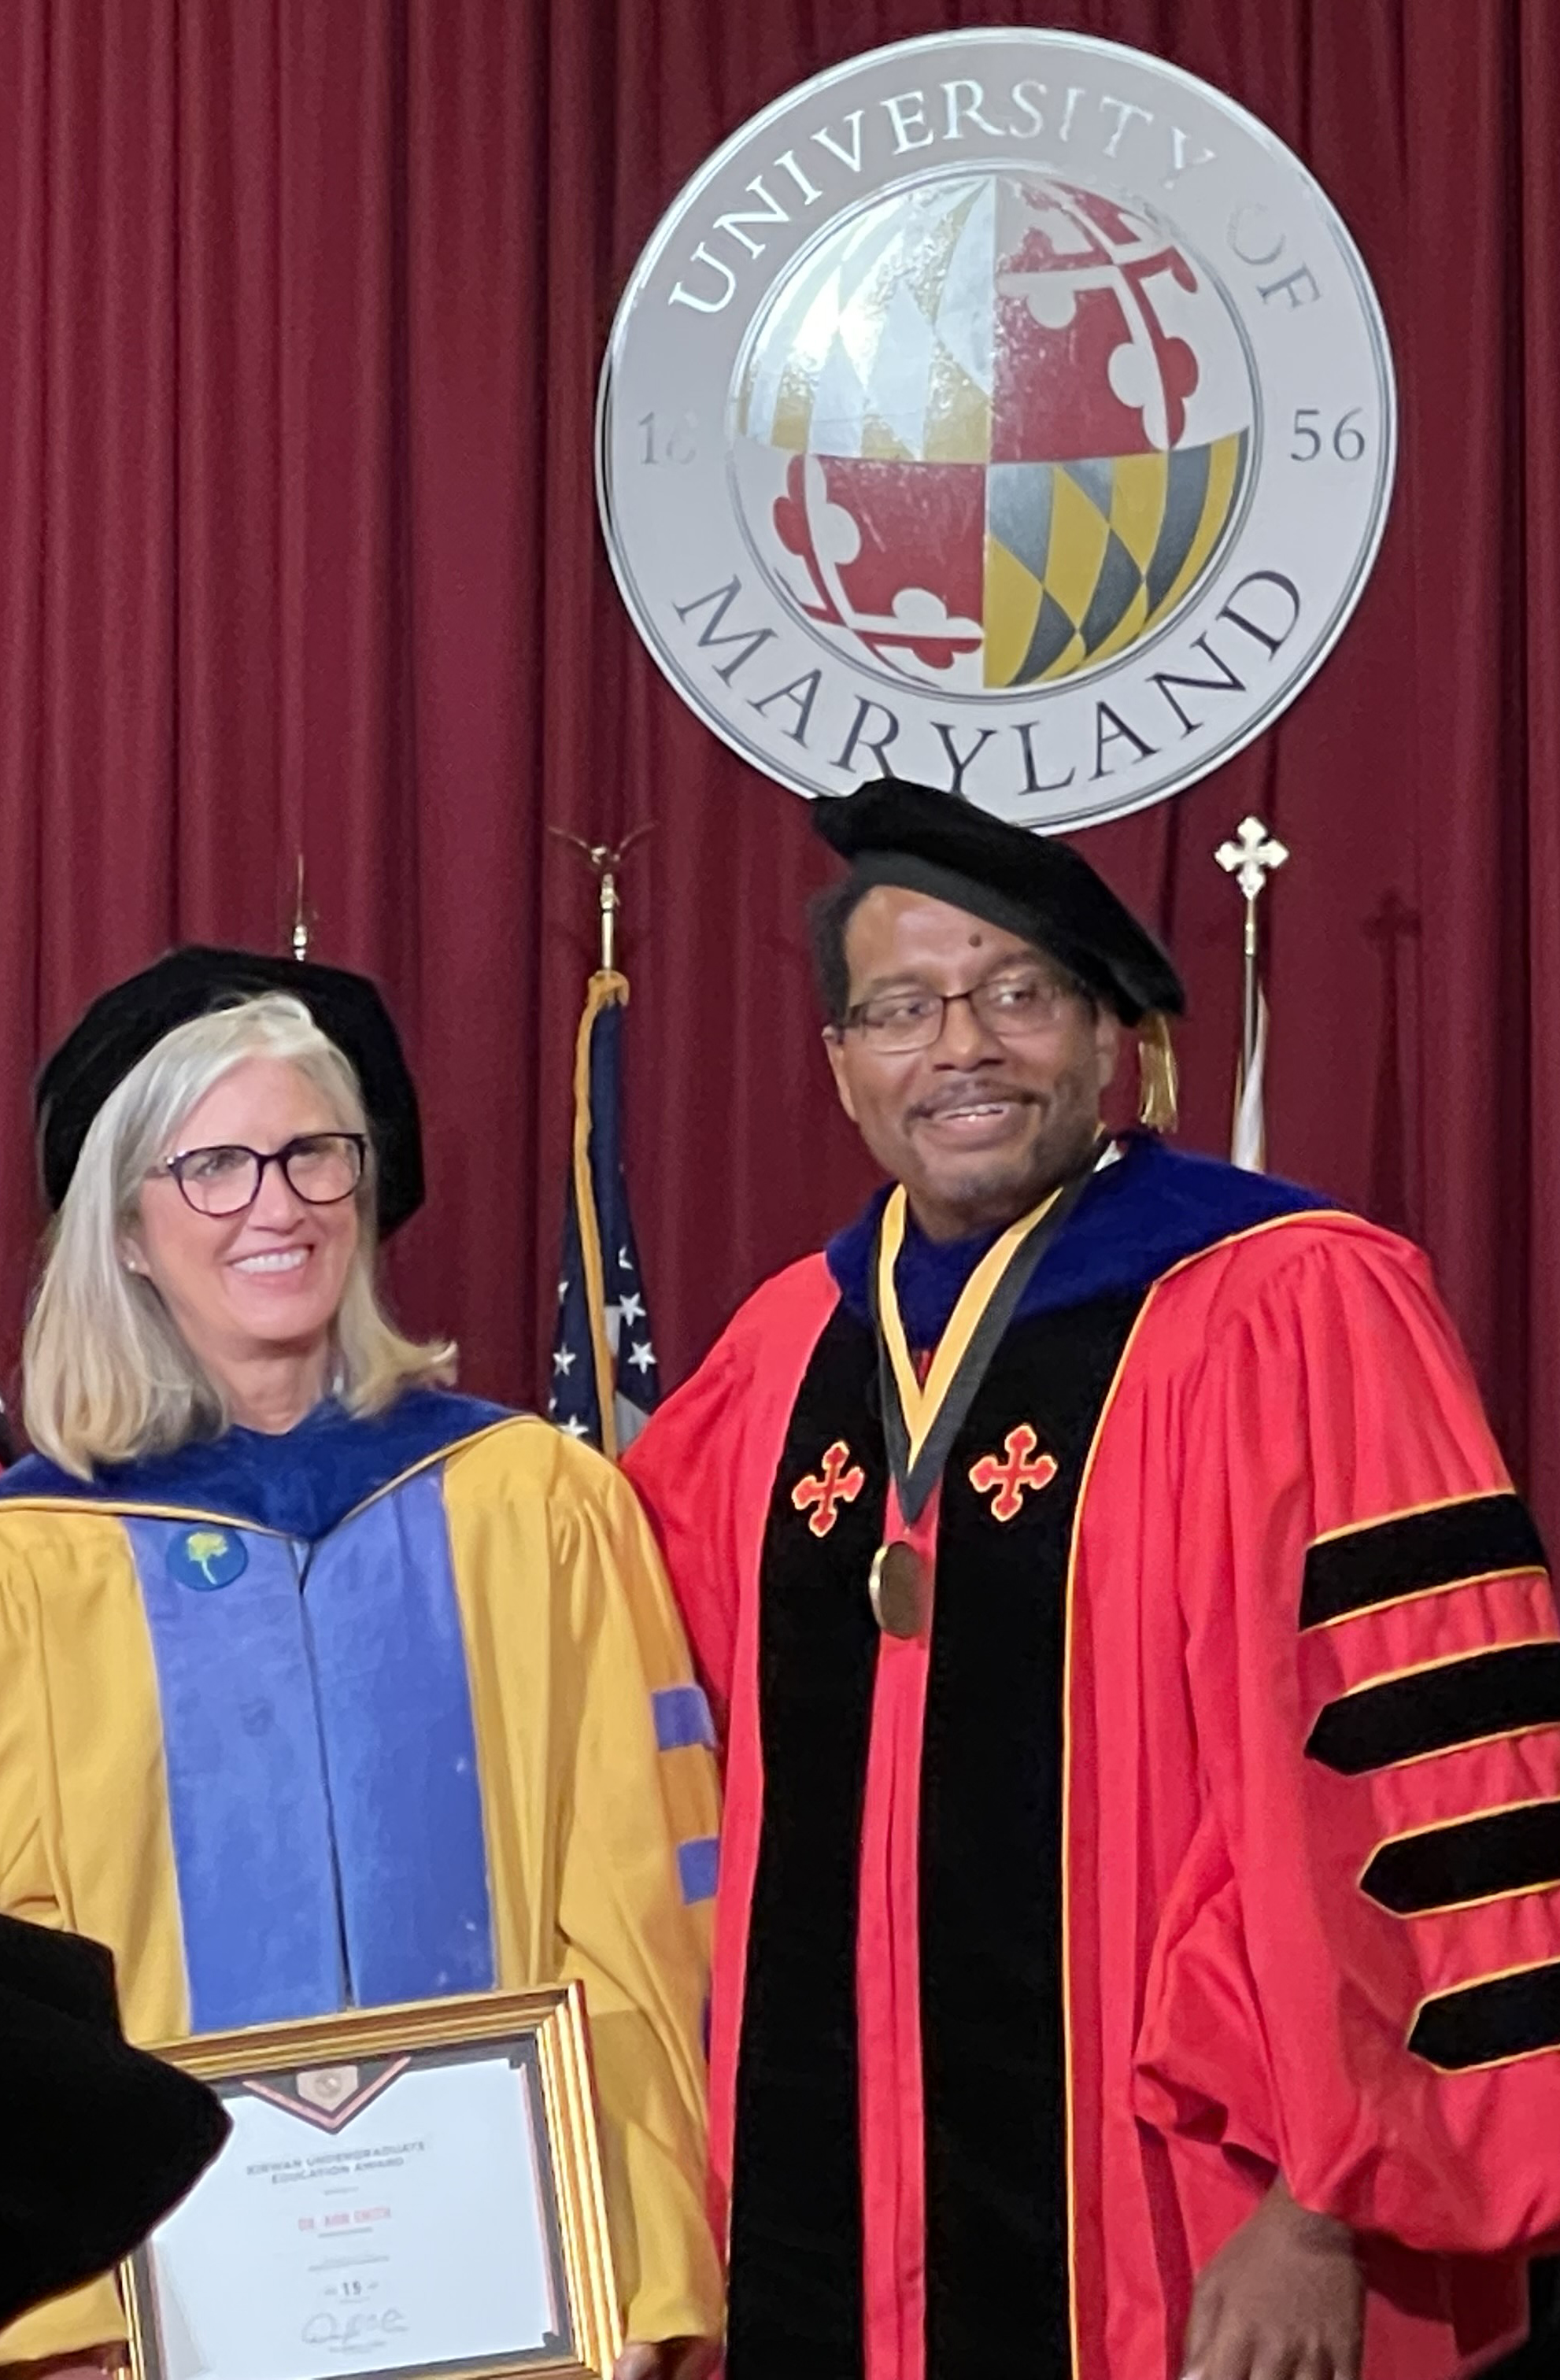 Ann Smith and Presidnet Pines at convocation ceremony